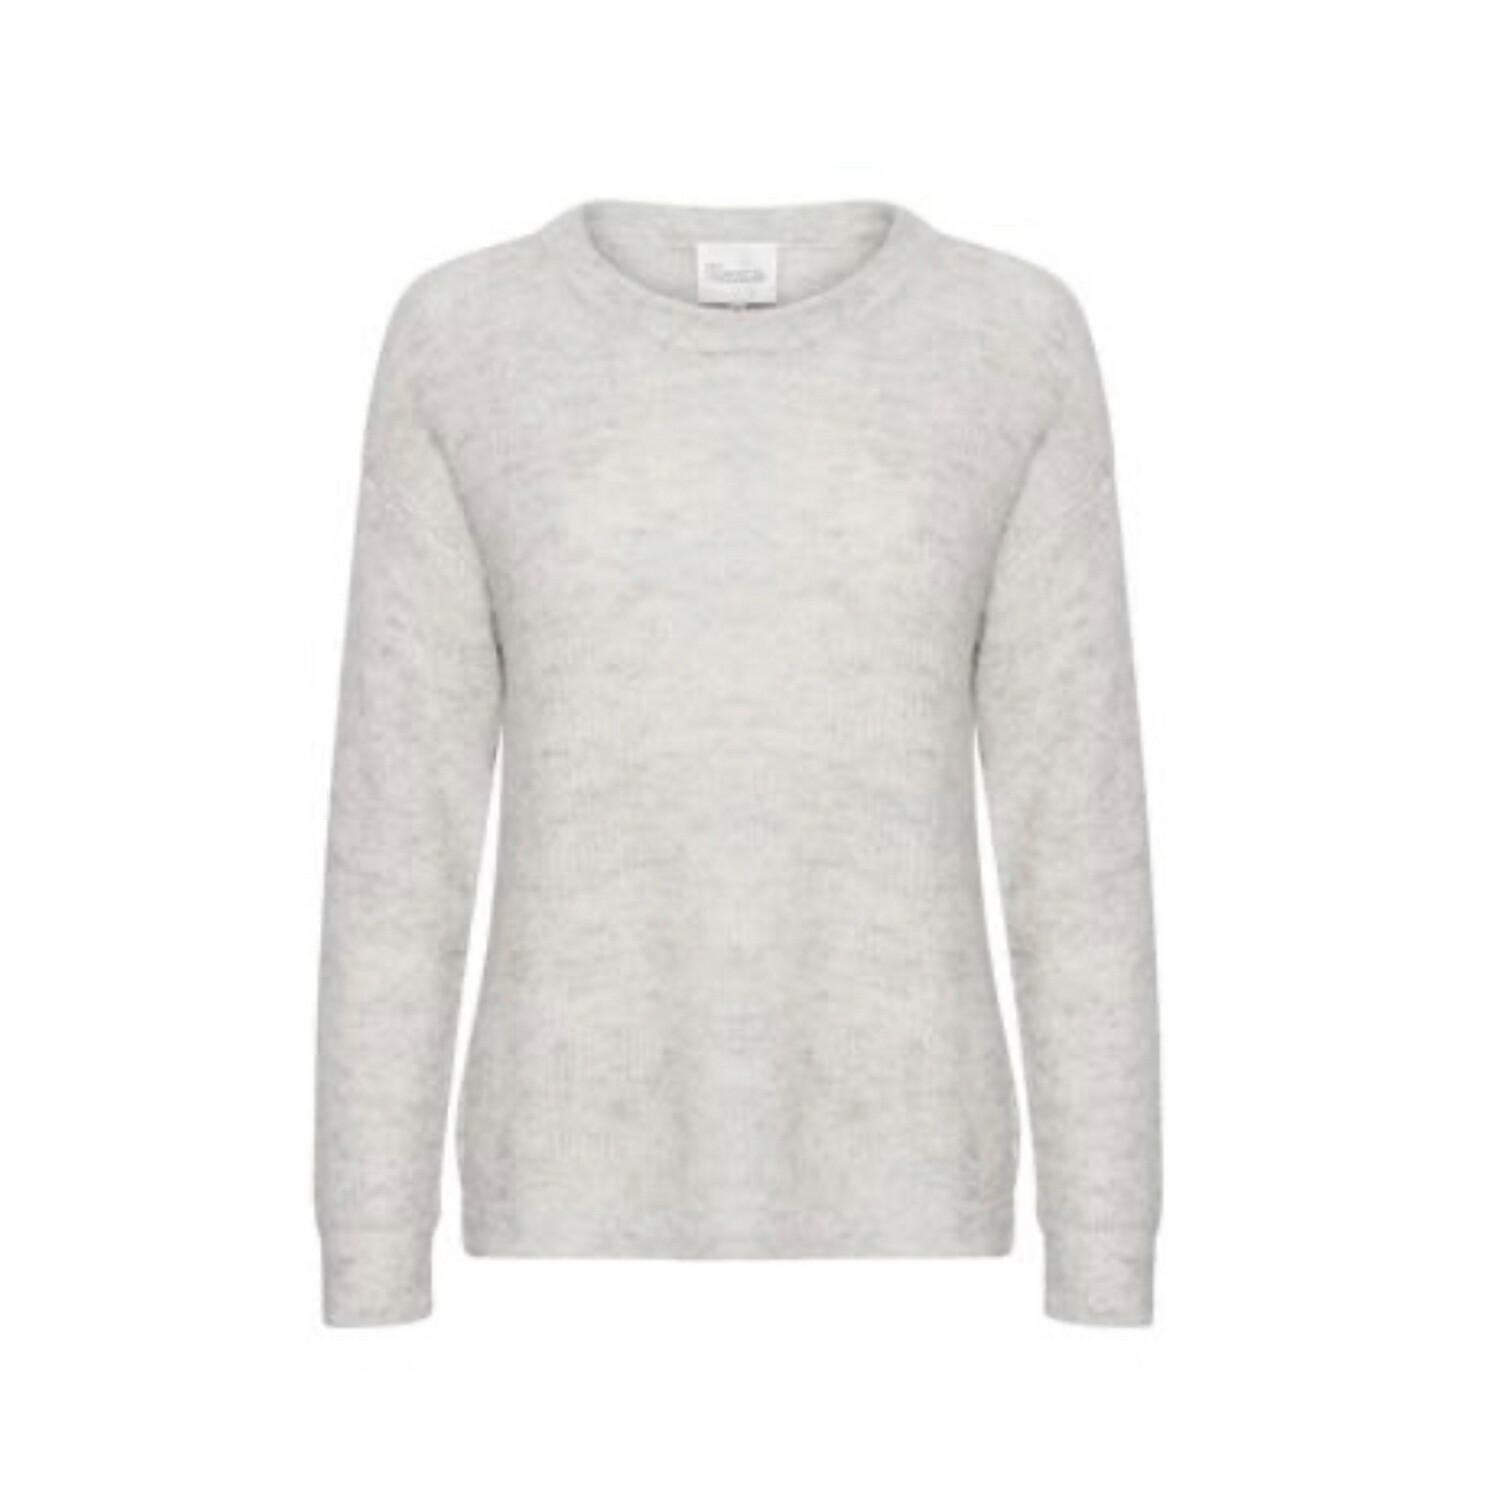 My Essential Wardrobe - The Knit PULLOVER